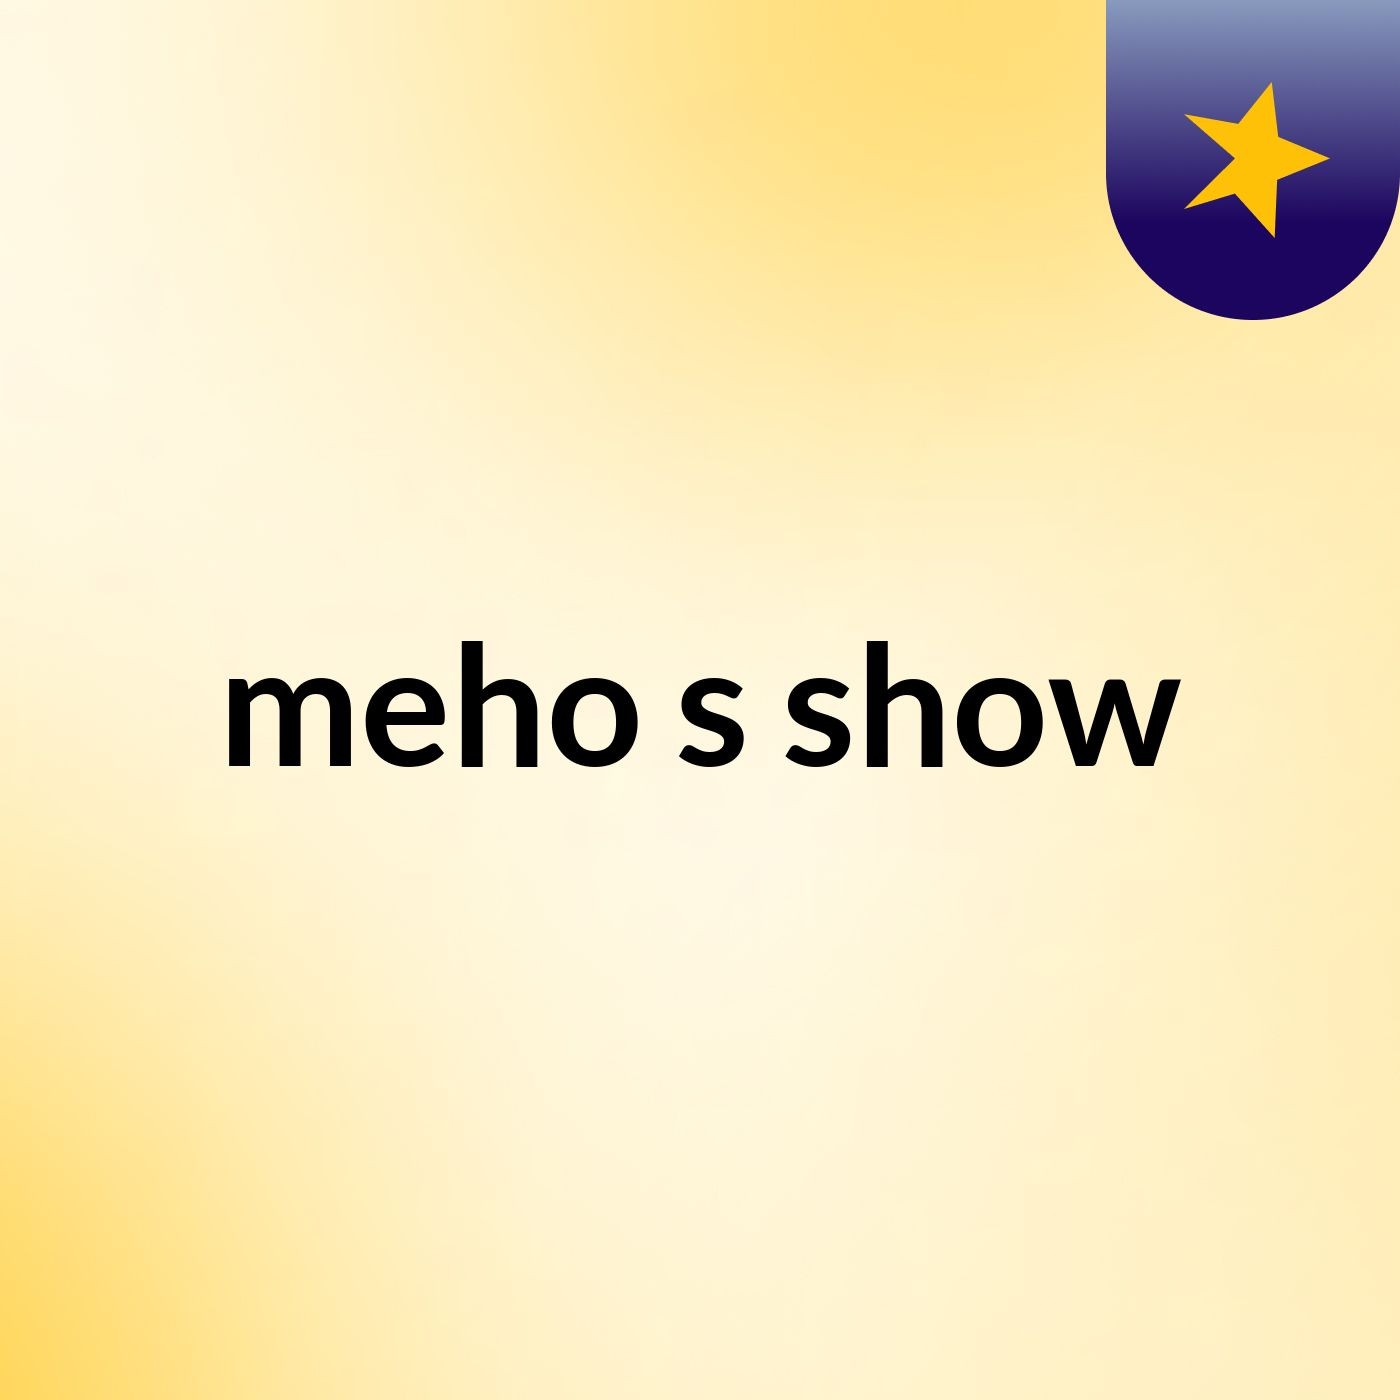 meho's show